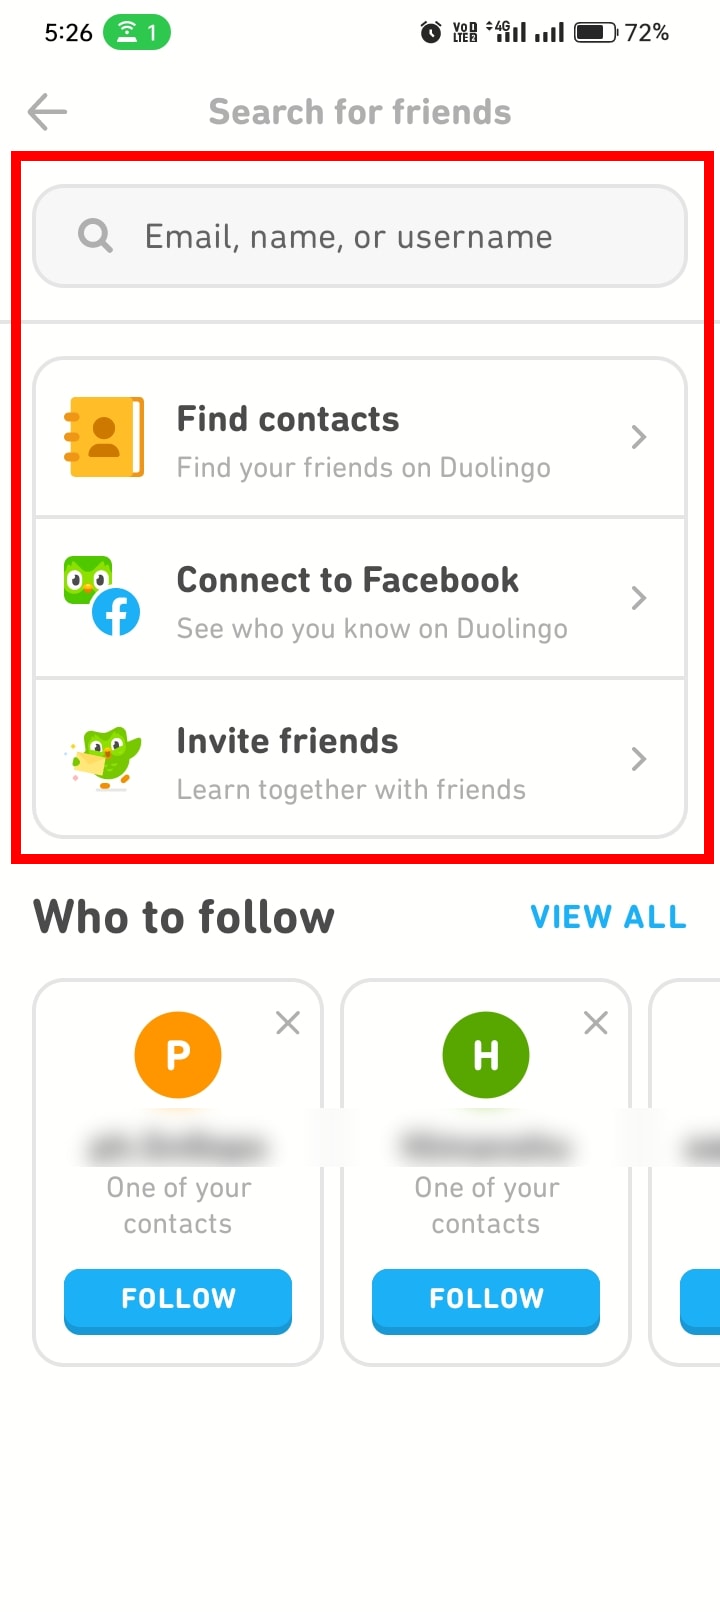 You'll encounter four options: Search Bar, Find contacts, Connect to Facebook, and Invite friends.